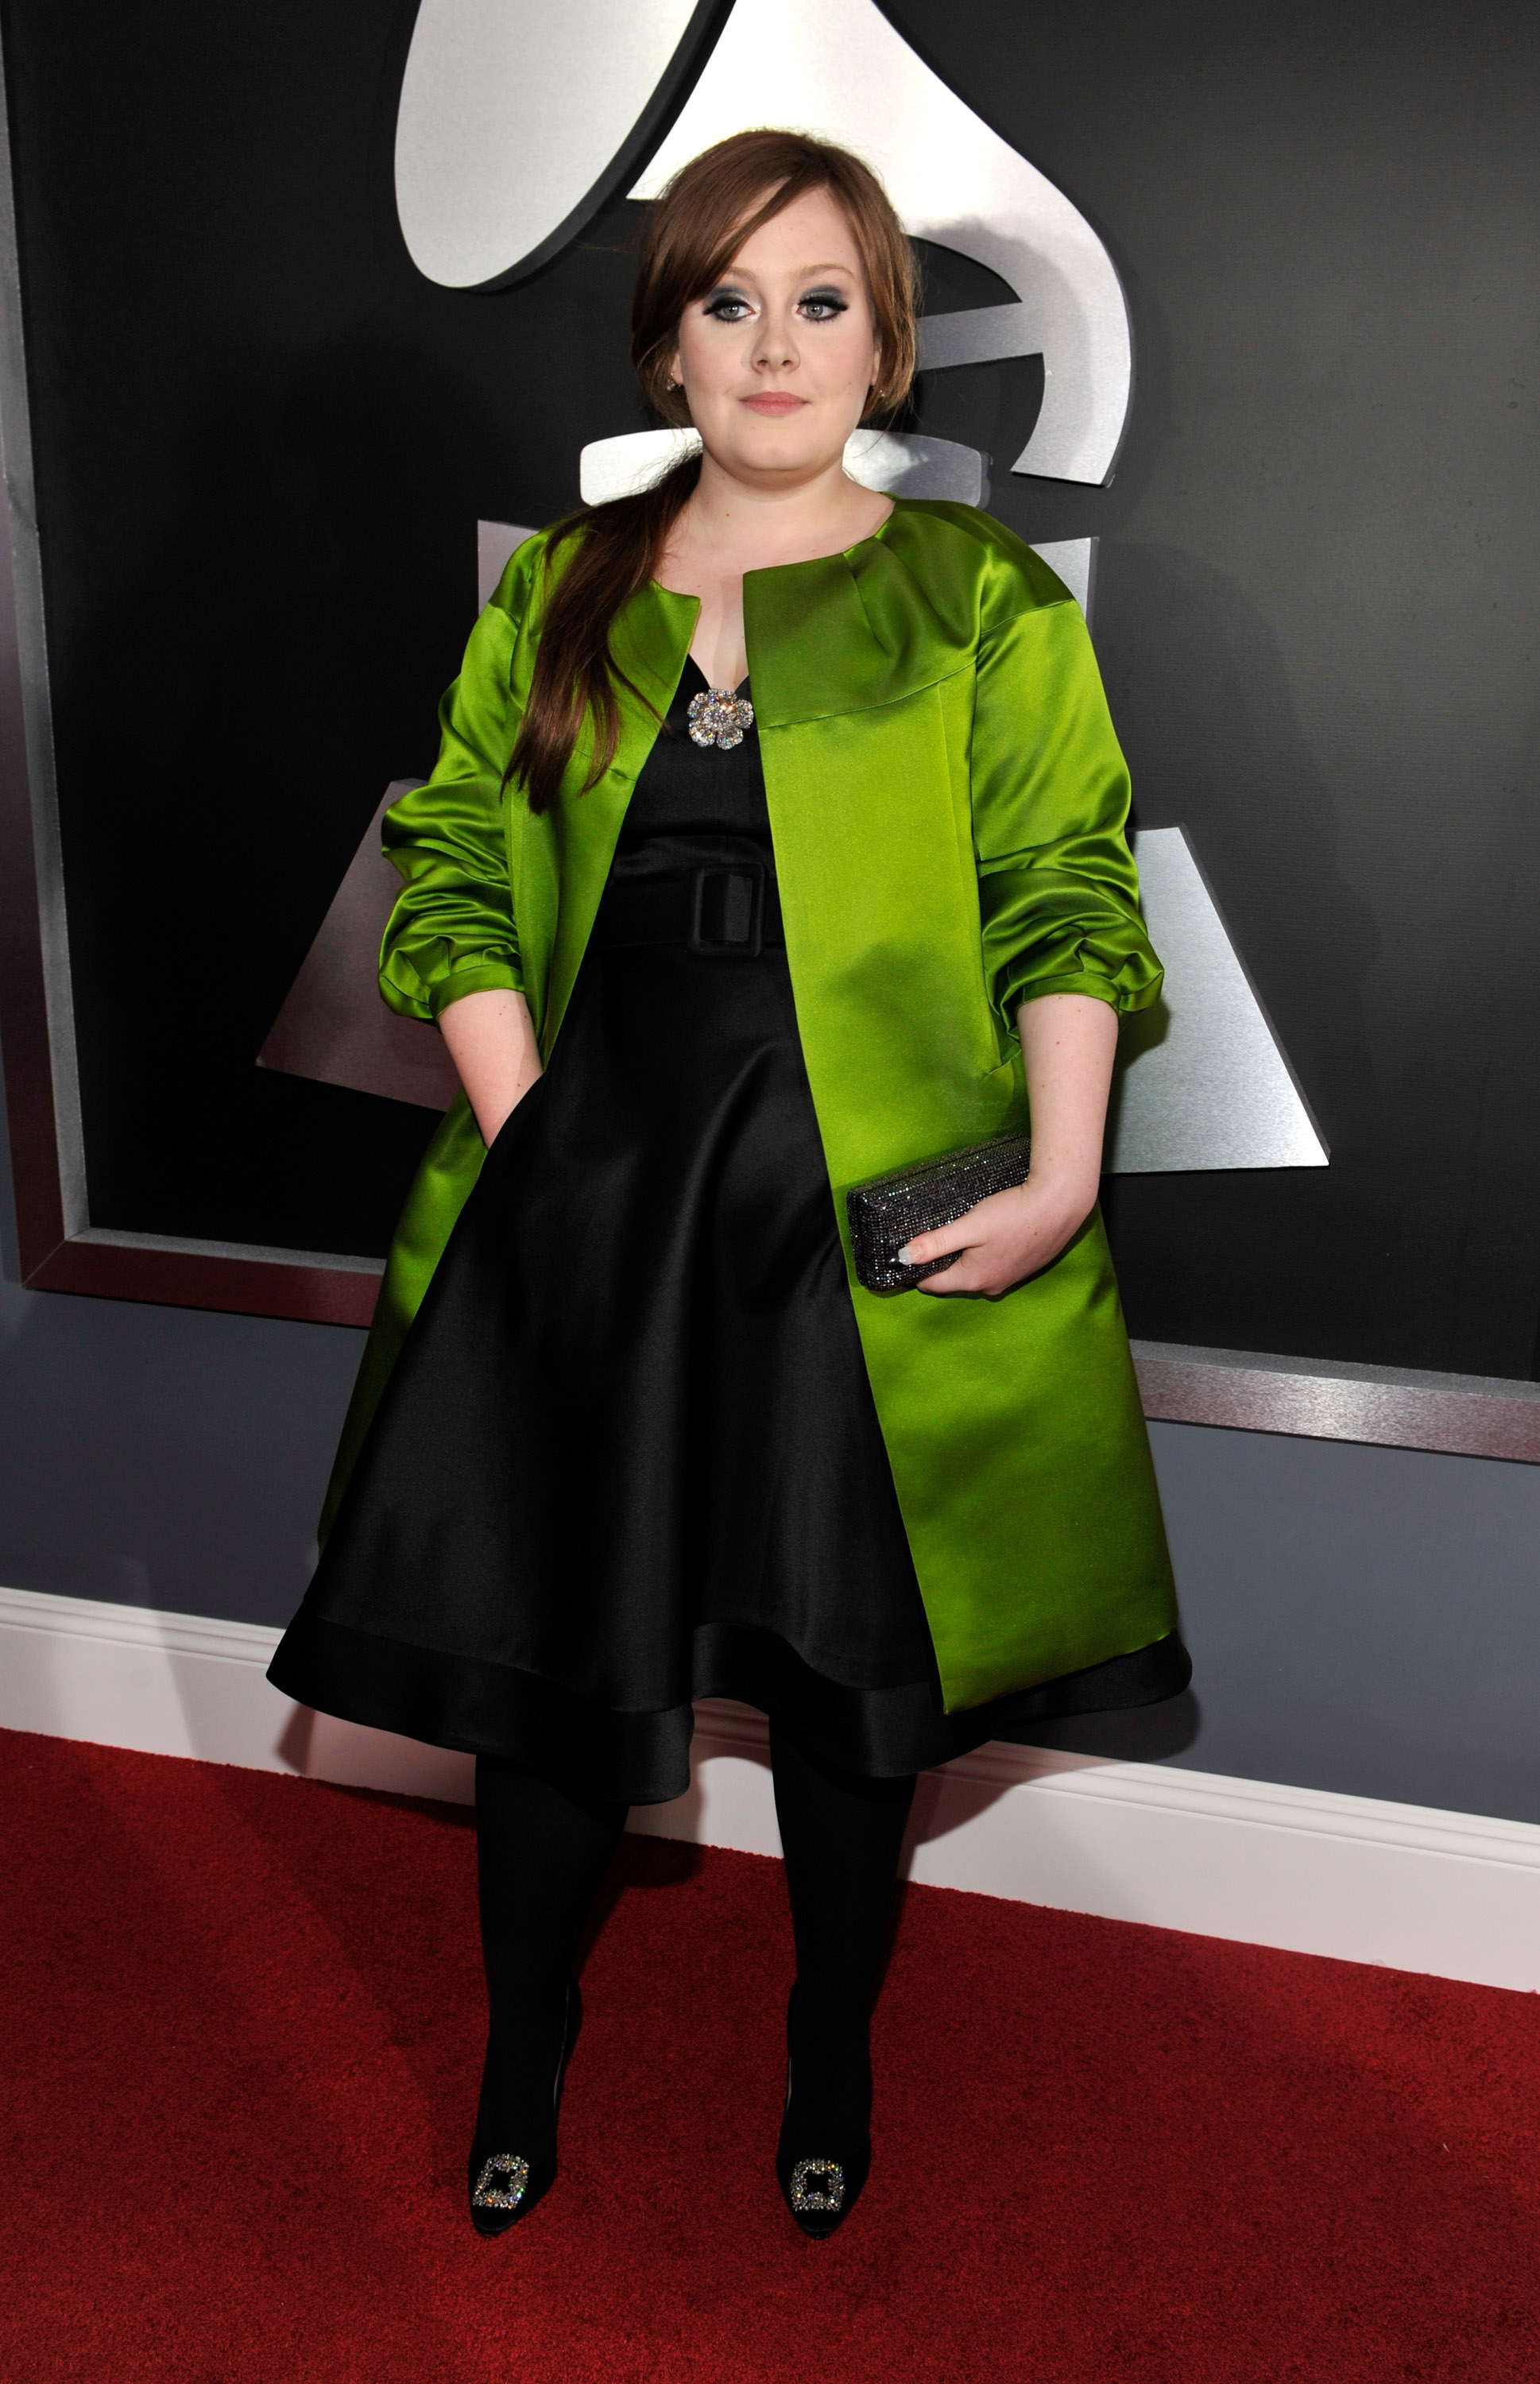 Adele arrives at the 51st Annual GRAMMY Awards at the Staples Center in Los Angeles on Feb. 8, 2009.